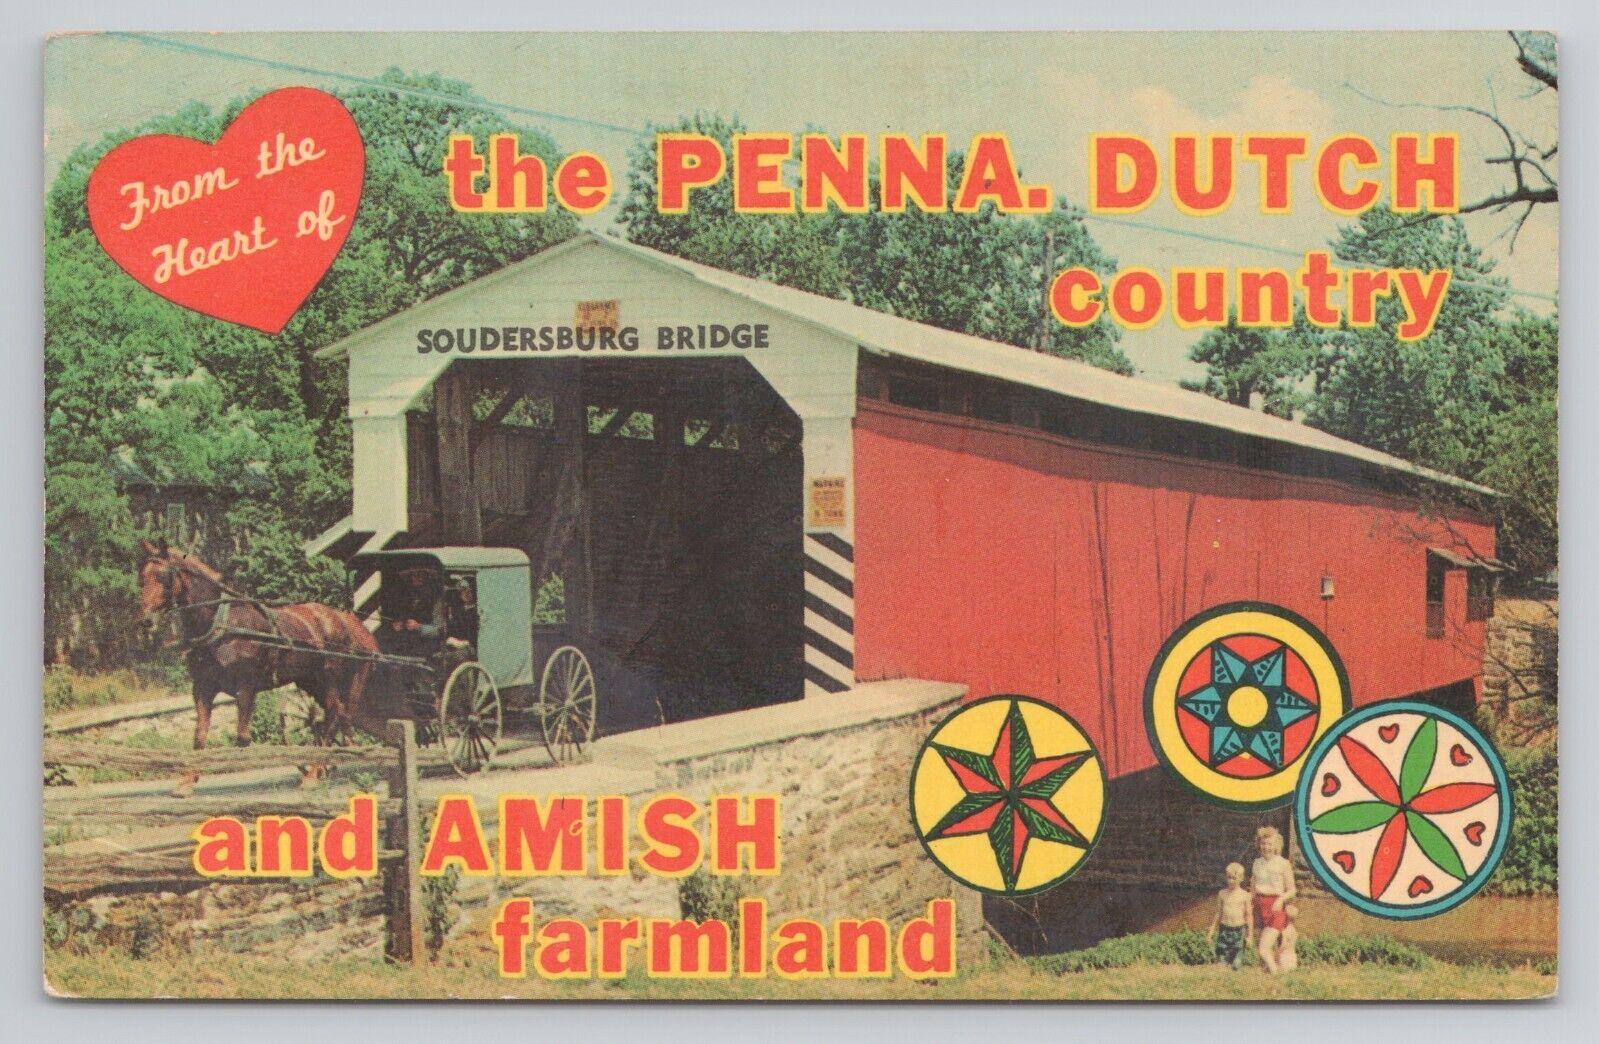 Postcard Greetings from The Pennsylvania Dutch Country